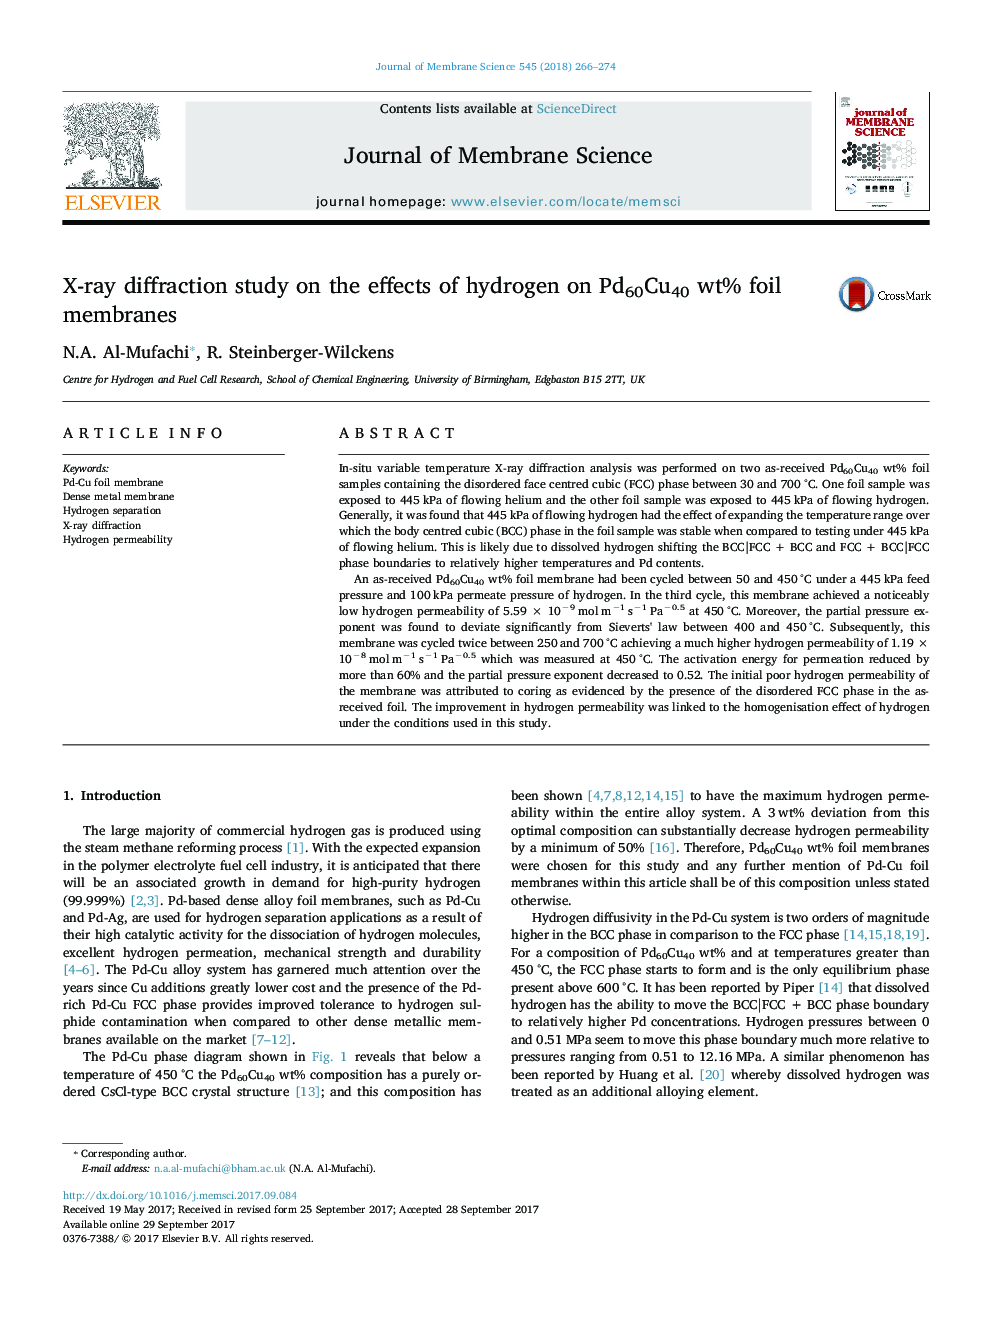 X-ray diffraction study on the effects of hydrogen on Pd60Cu40 wt% foil membranes